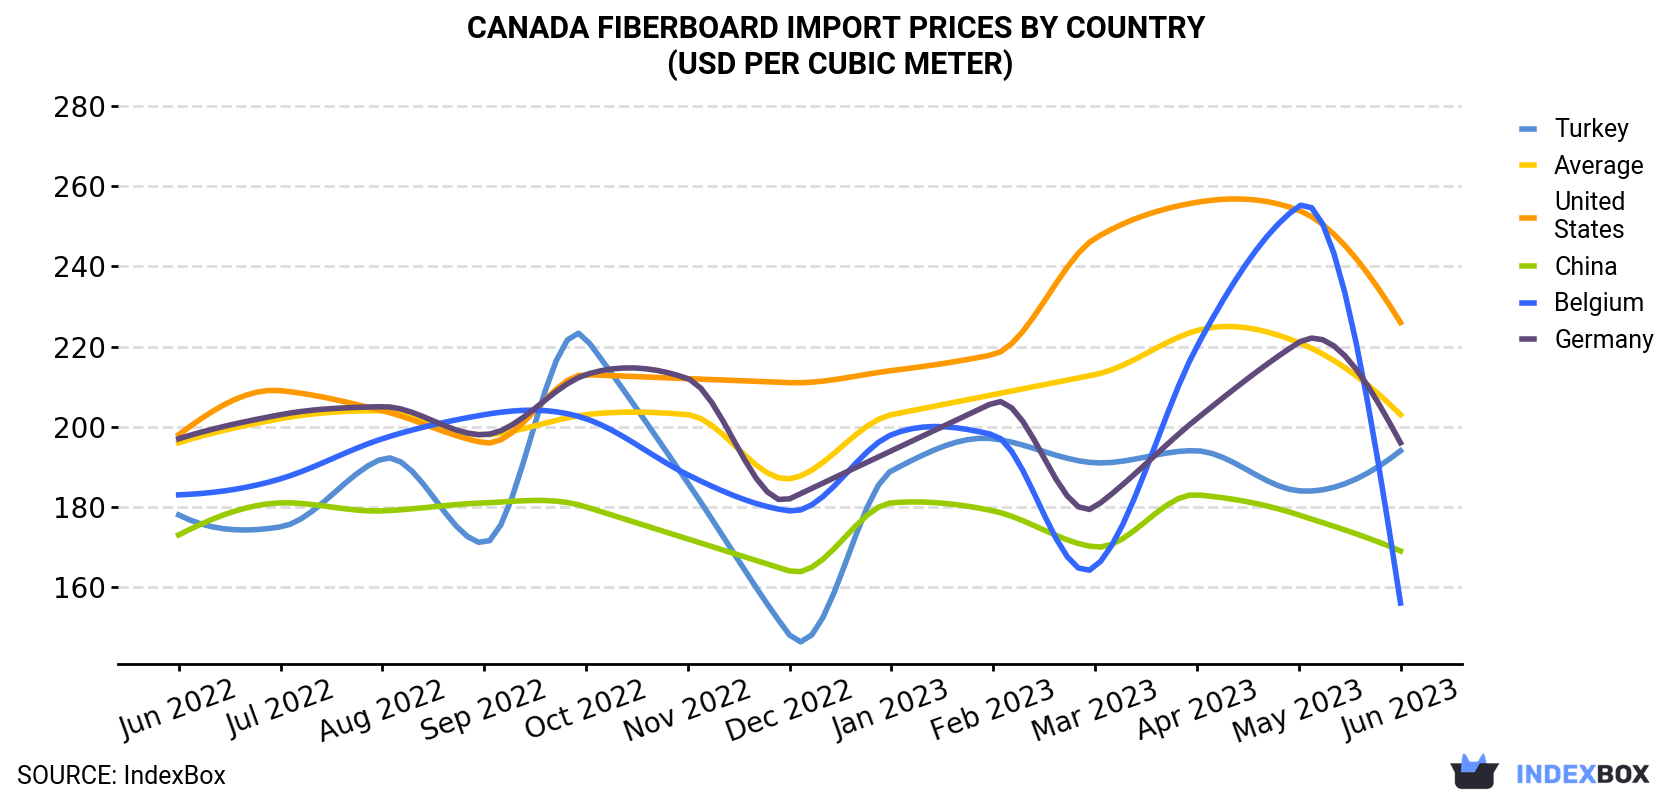 Canada Fiberboard Import Prices By Country (USD Per Cubic Meter)